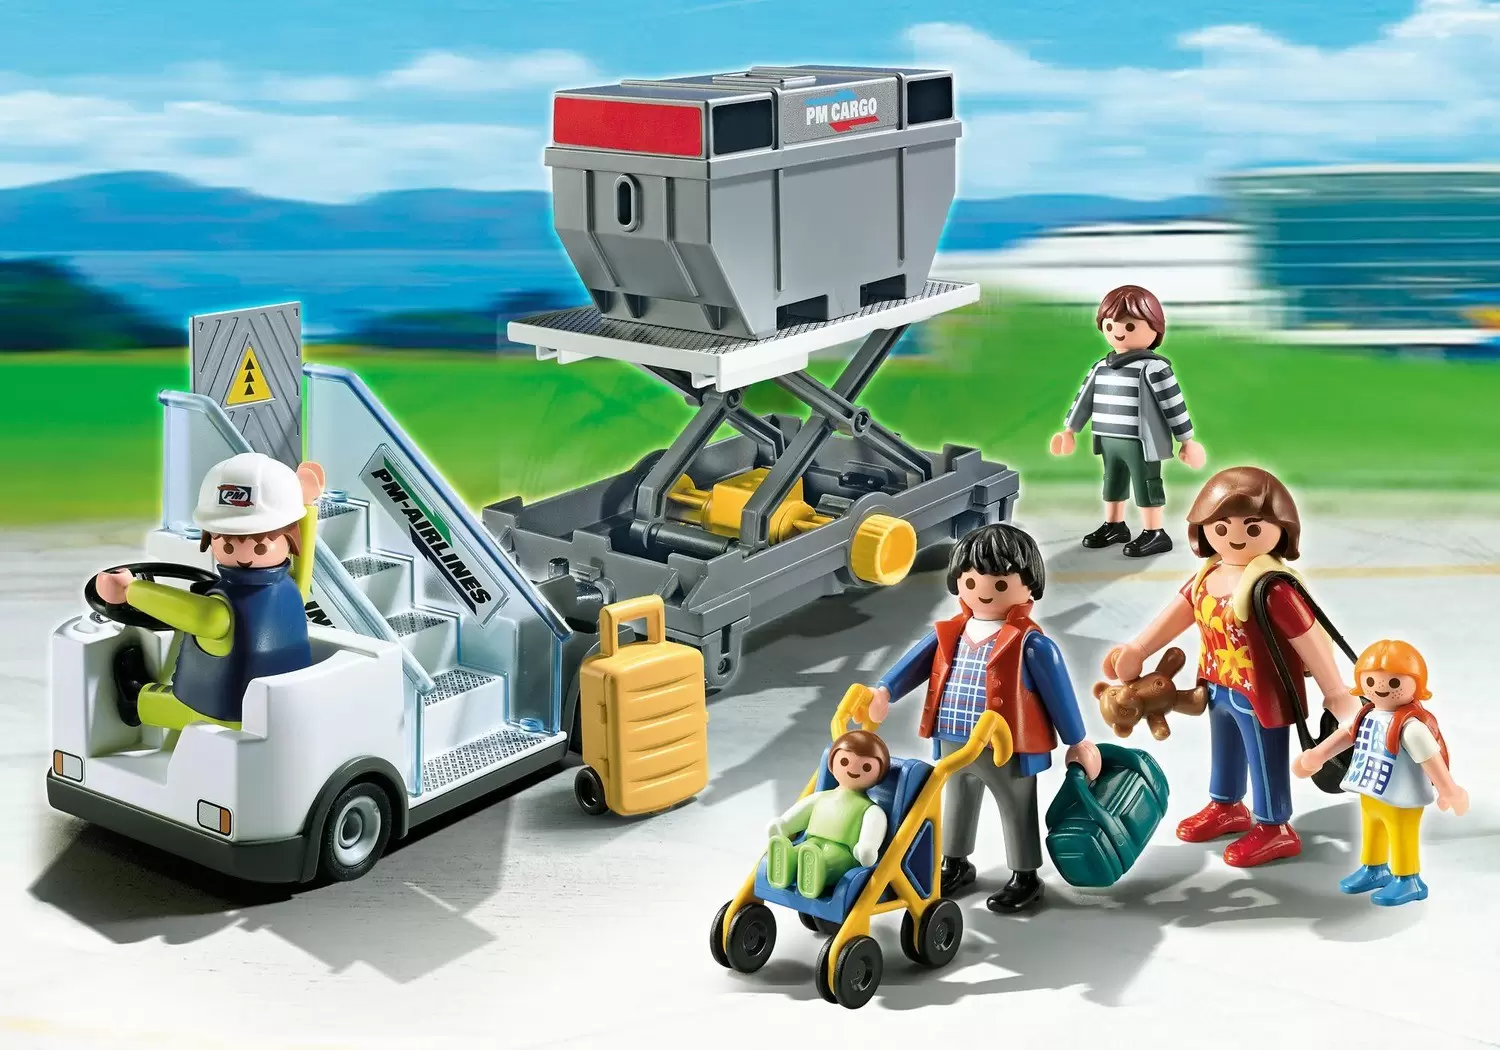 Playmobil c429 vehicle-airport with plane access stairs 4315 